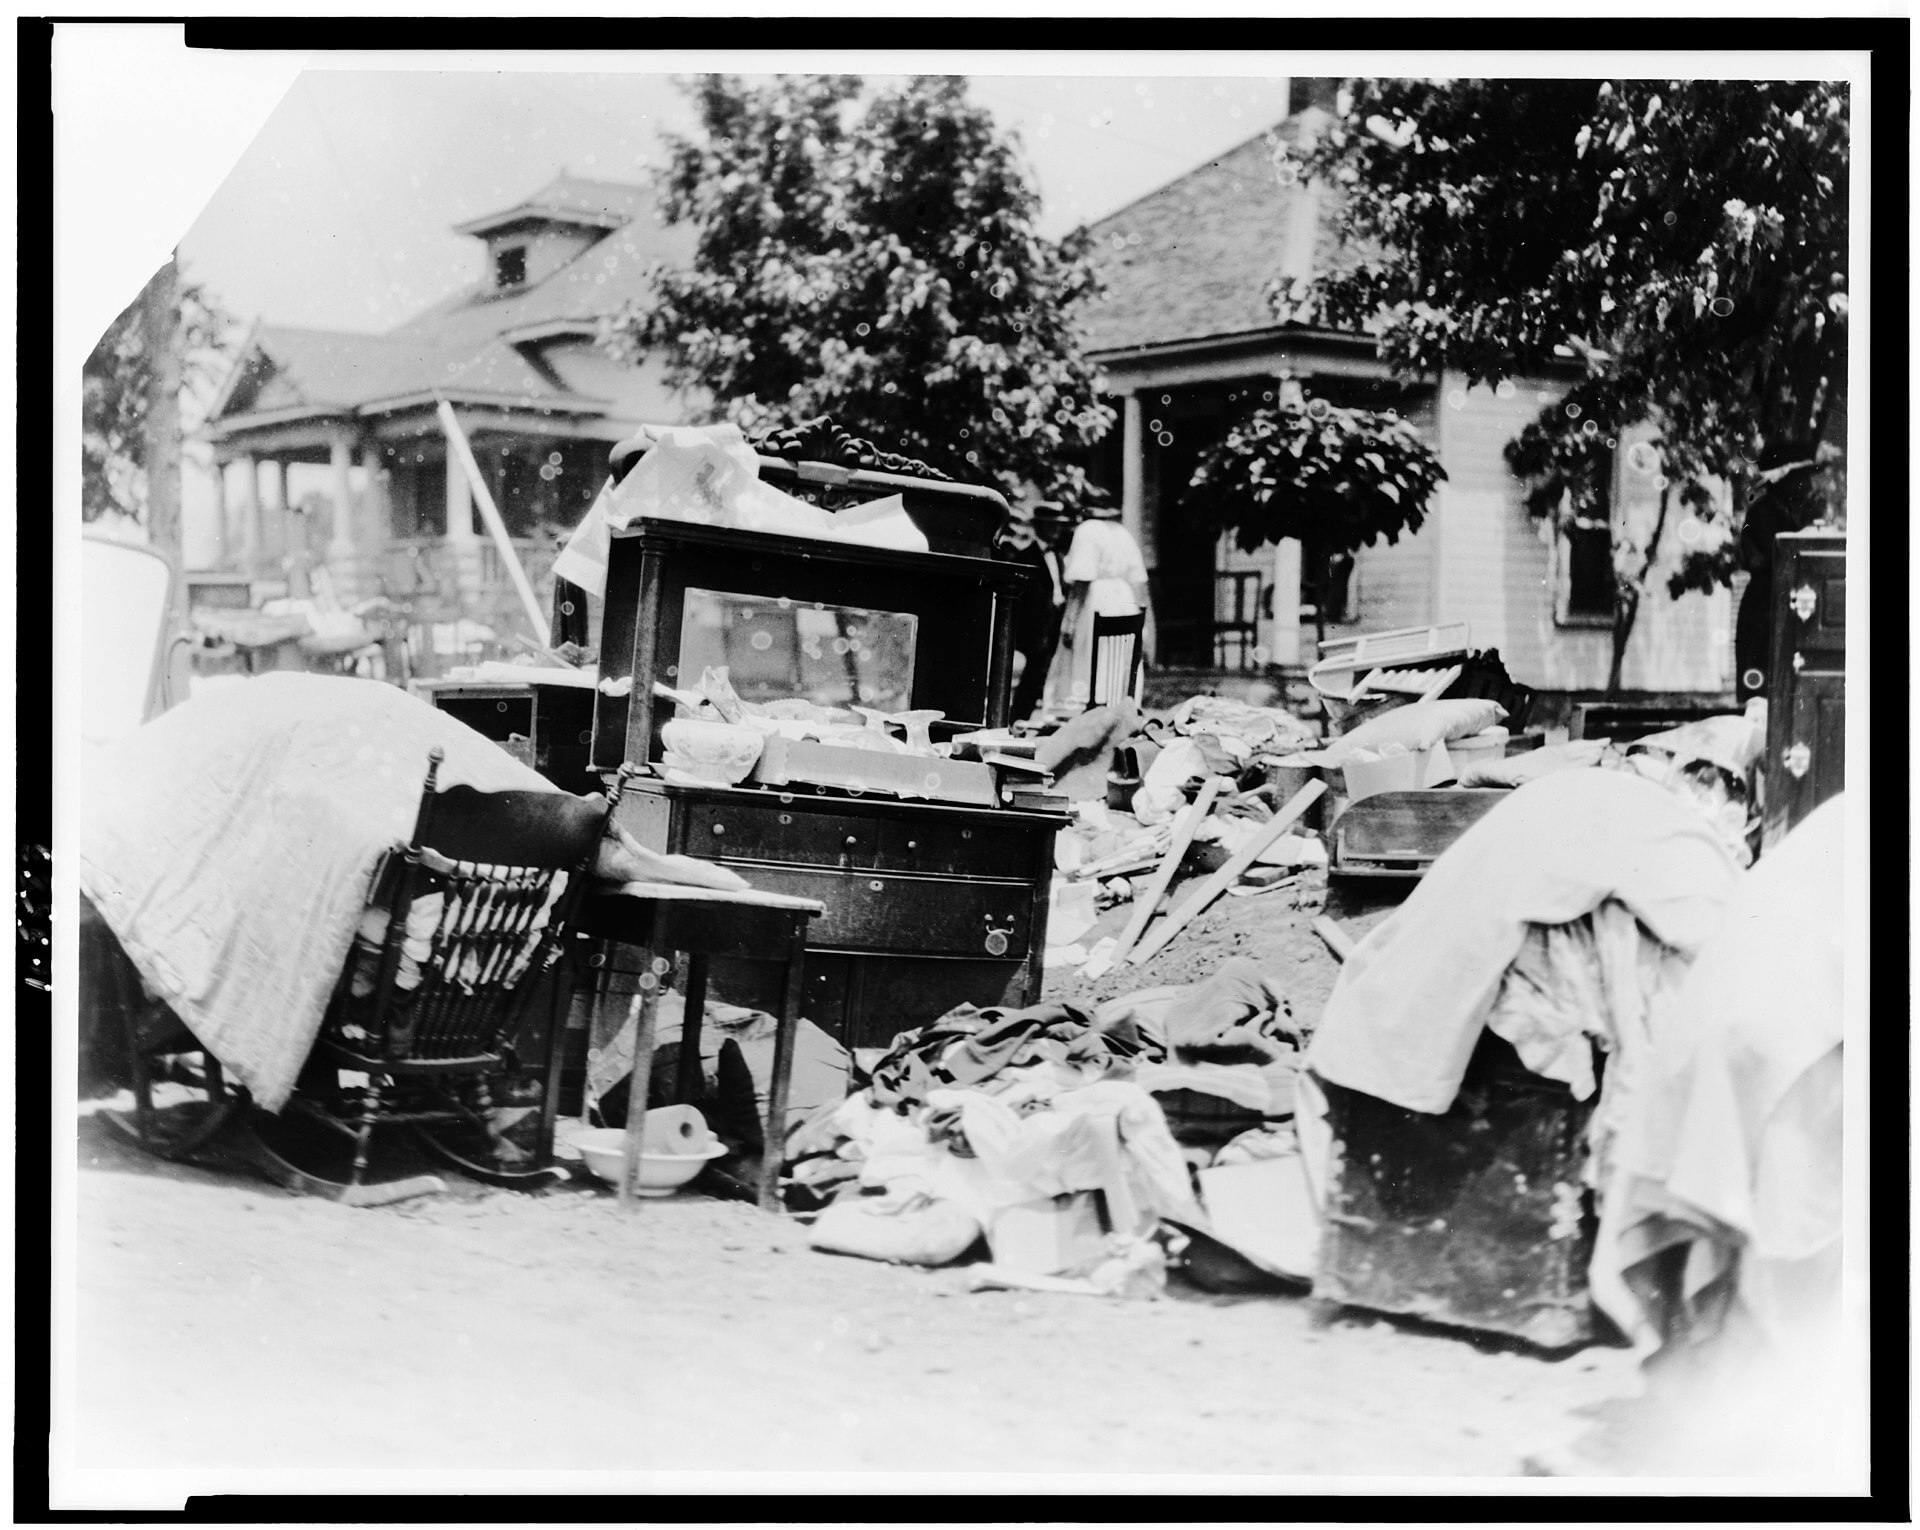 A file photo of furniture on the streets of greenwood